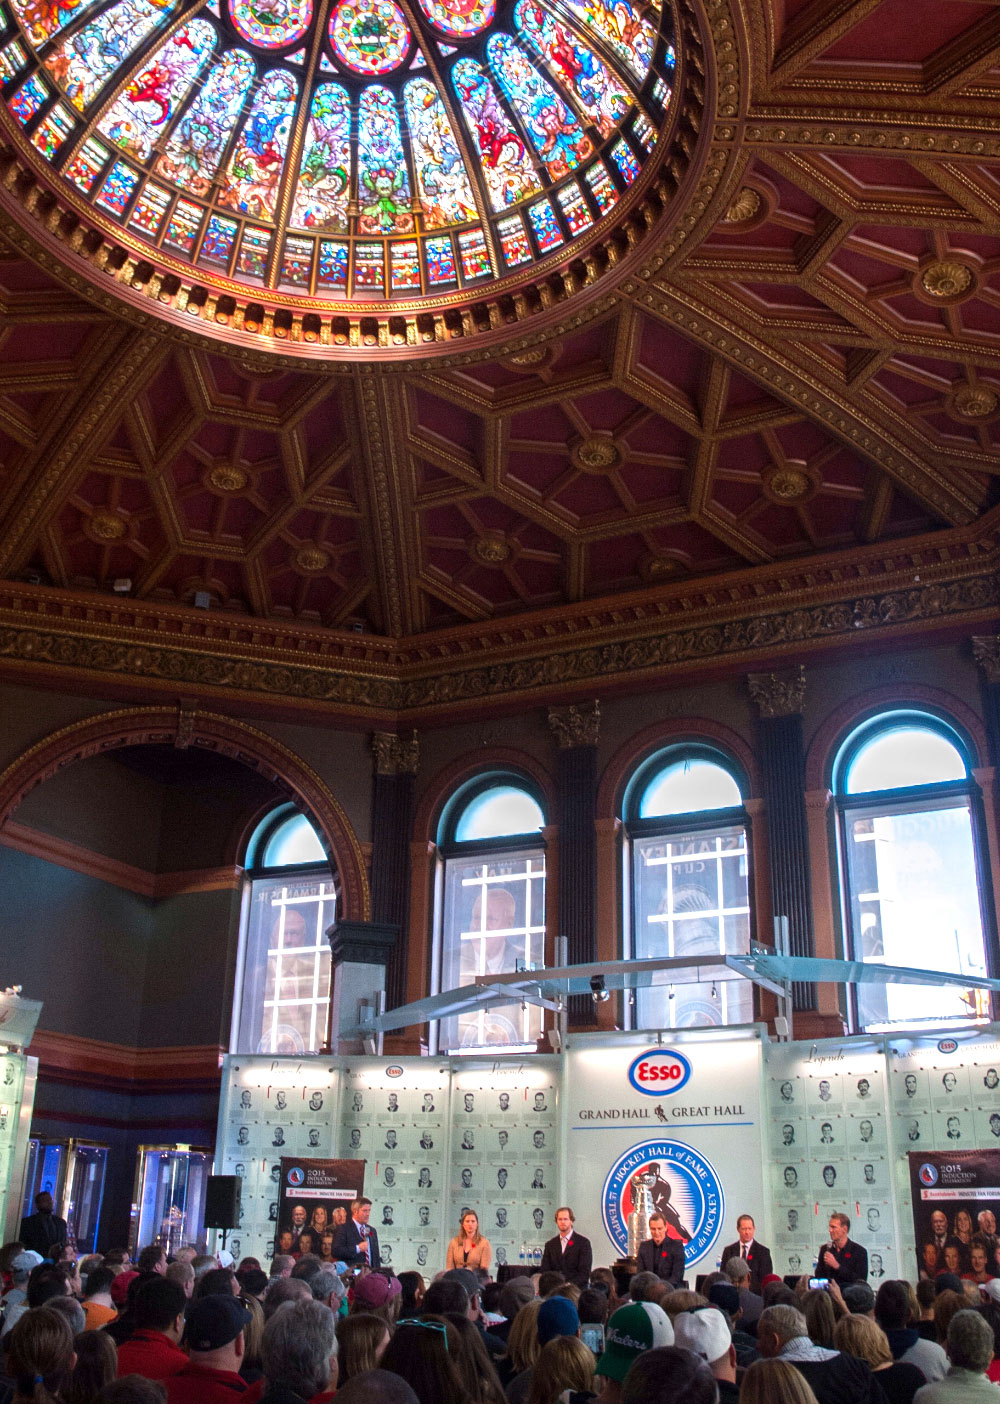 Hockey Hall of Fame ceiling